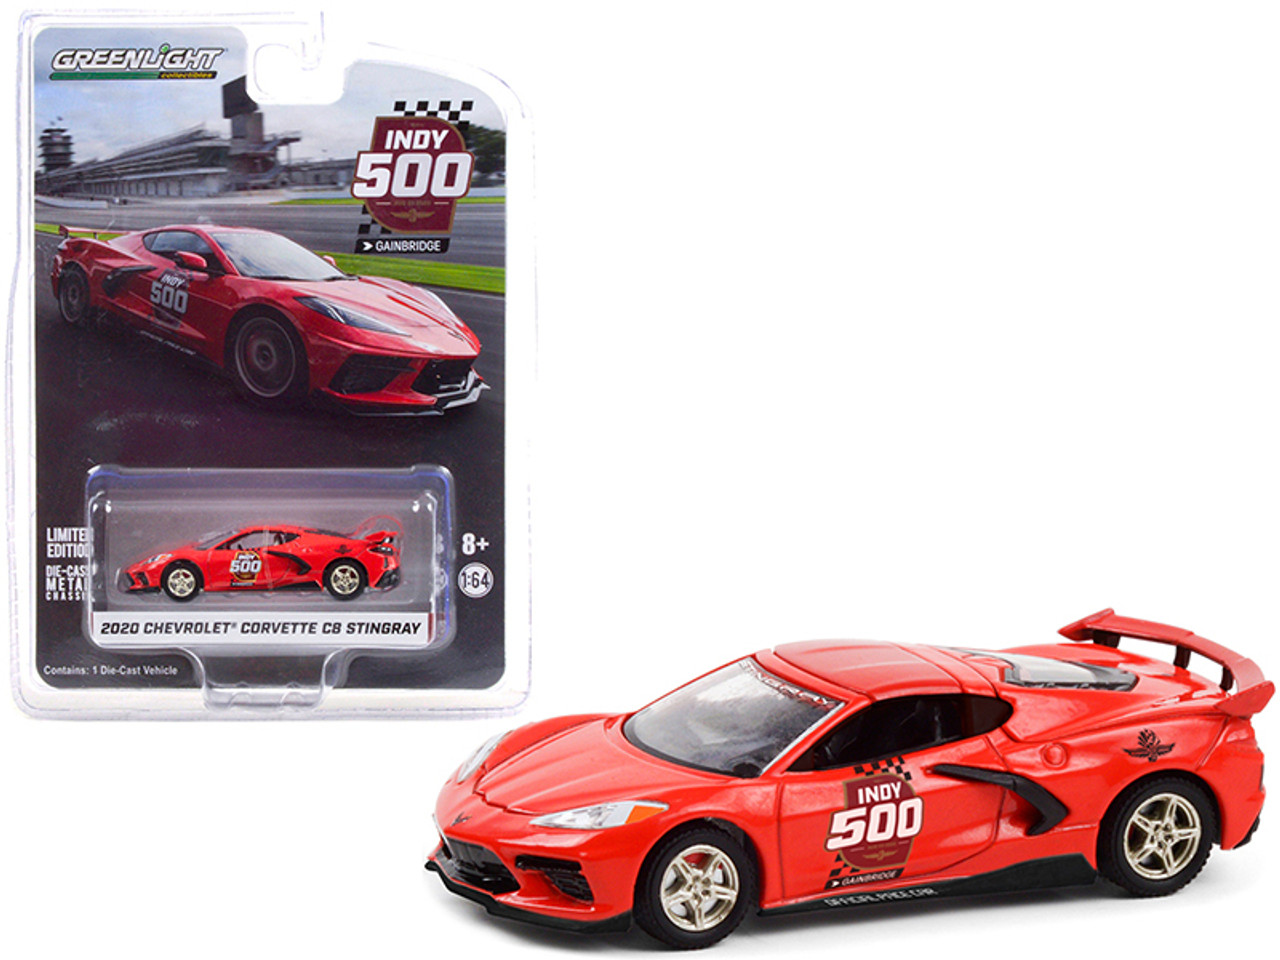 2020 Chevrolet Corvette C8 Stingray Red Official Pace Car "104th Running of the Indianapolis 500" "Hobby Exclusive" 1/64 Diecast Model Car by Greenlight